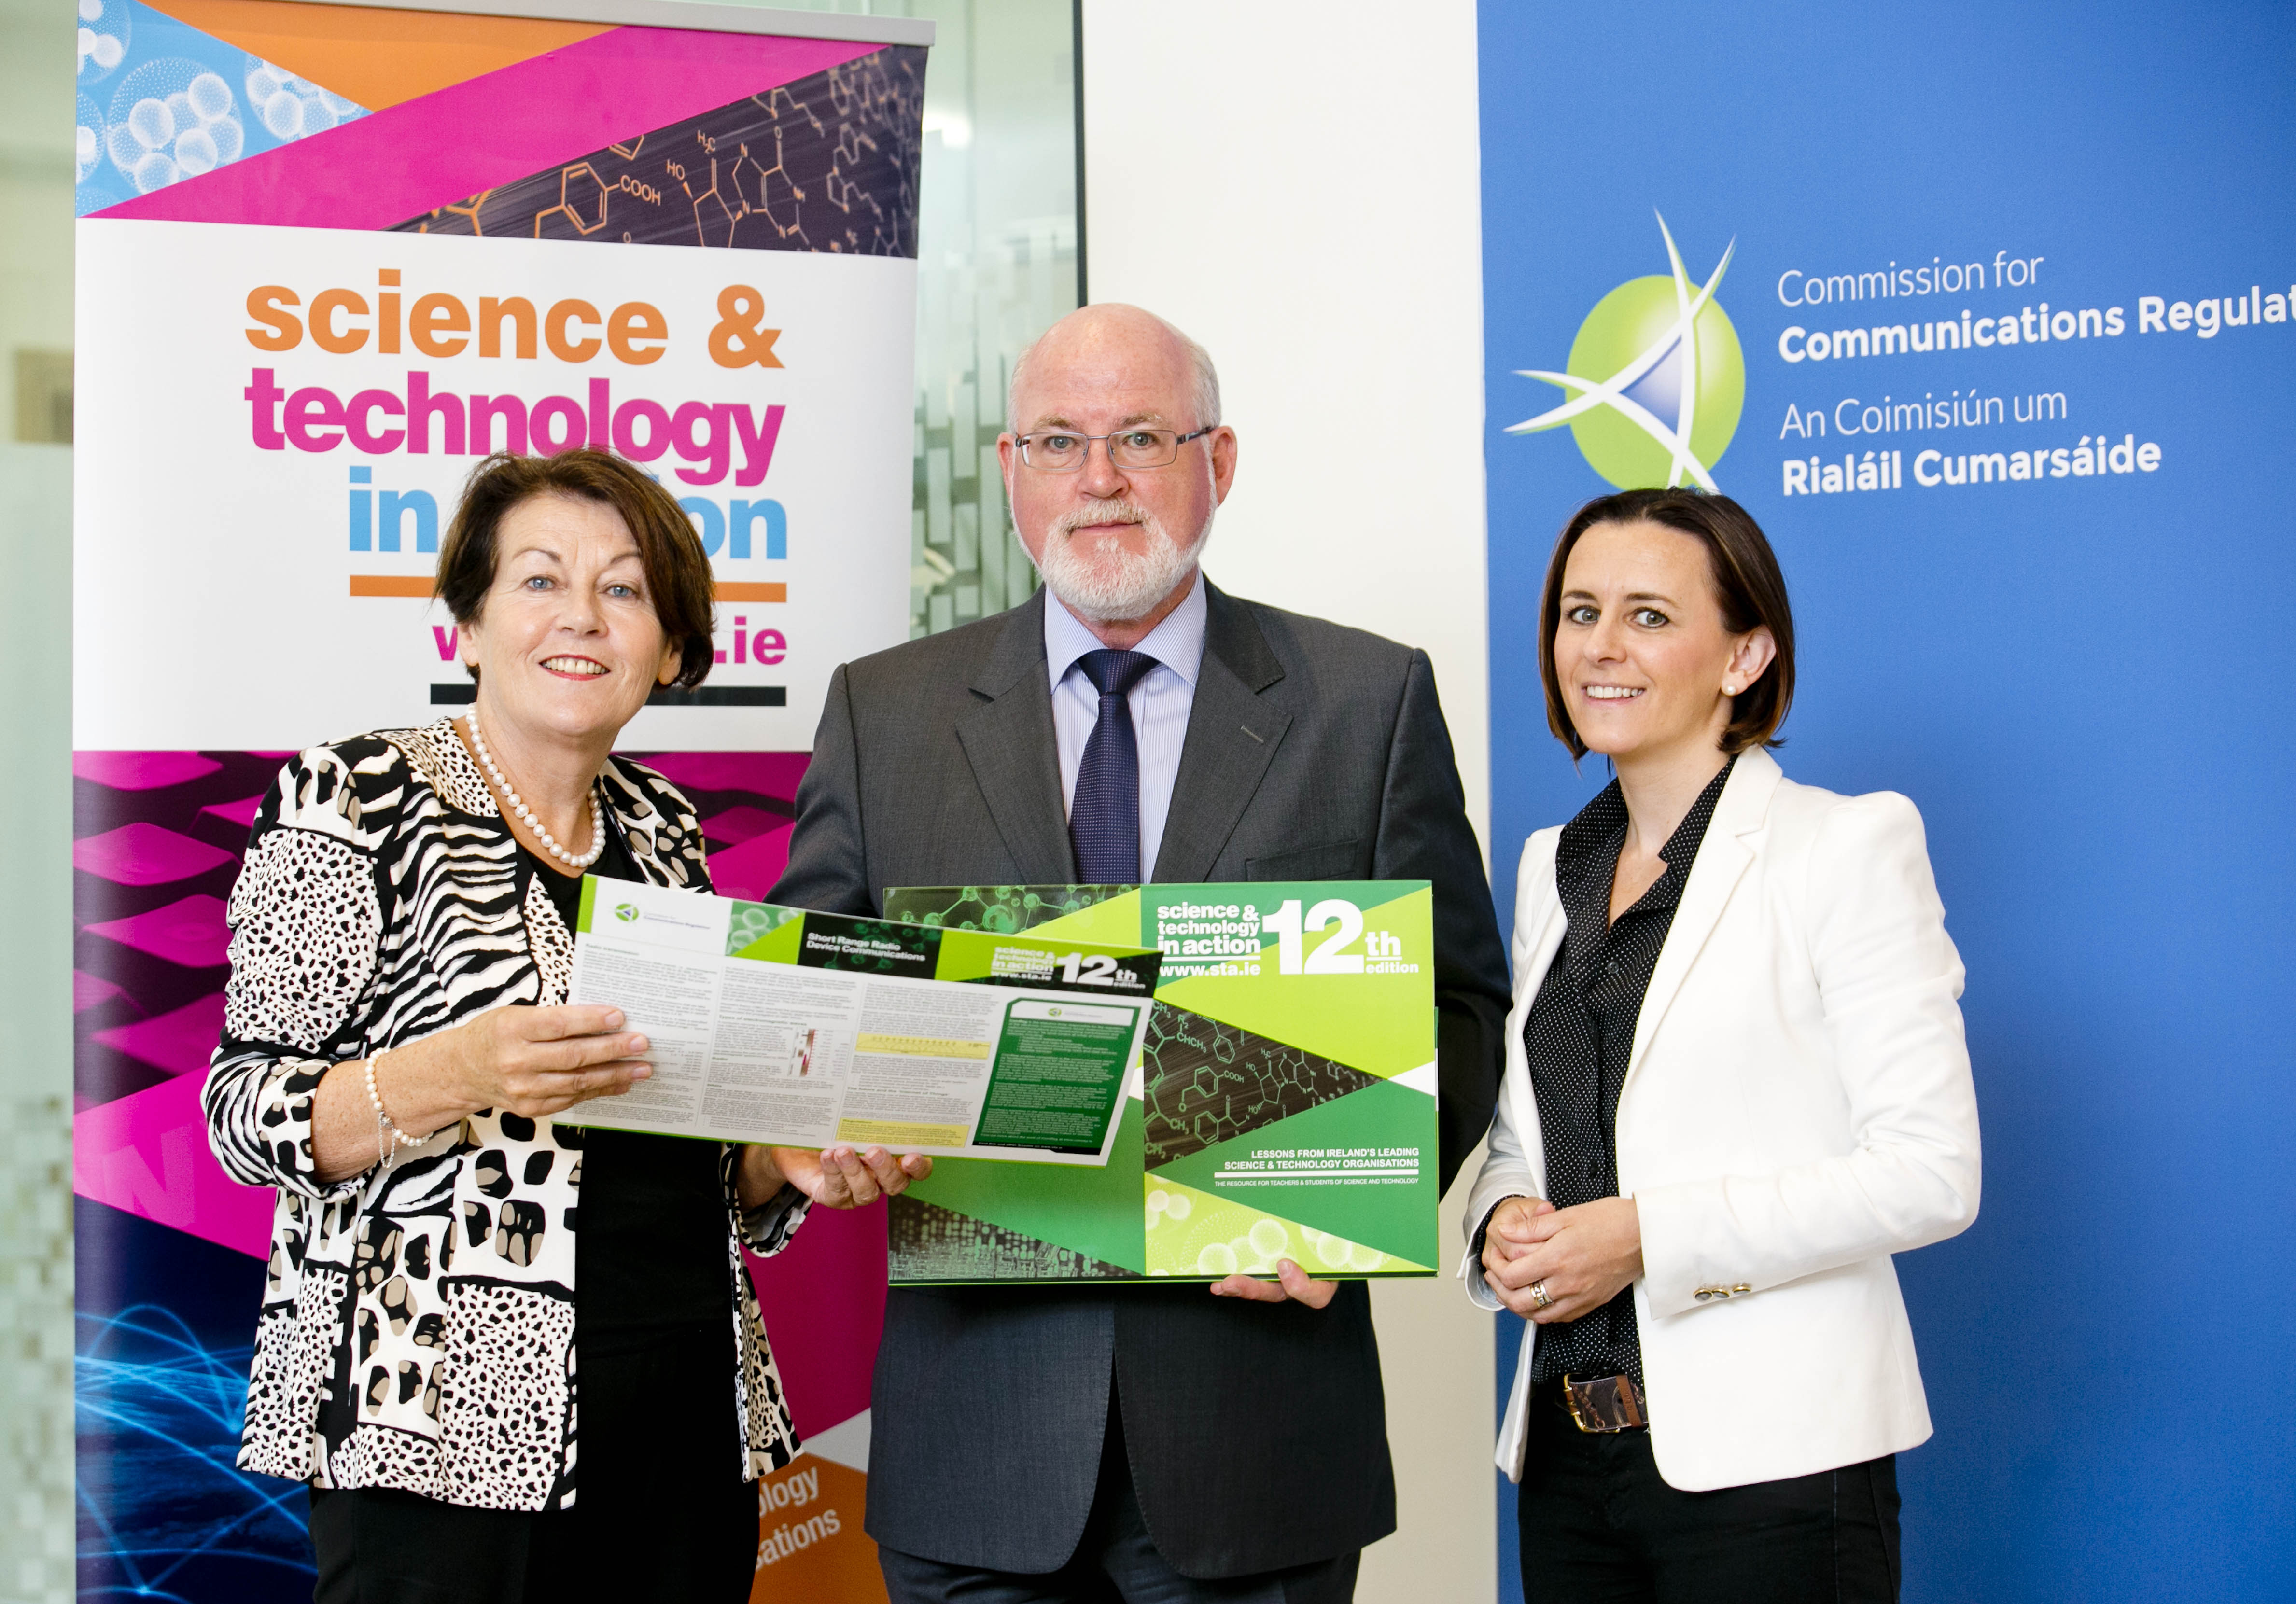 ComReg Chairperson Gerry Fahy pictured with Anna Gethings (Co-Founder) and Sara Cosgrave (Industry Engagement) both representing STA, being formally presented with ComReg’s 2017 lesson